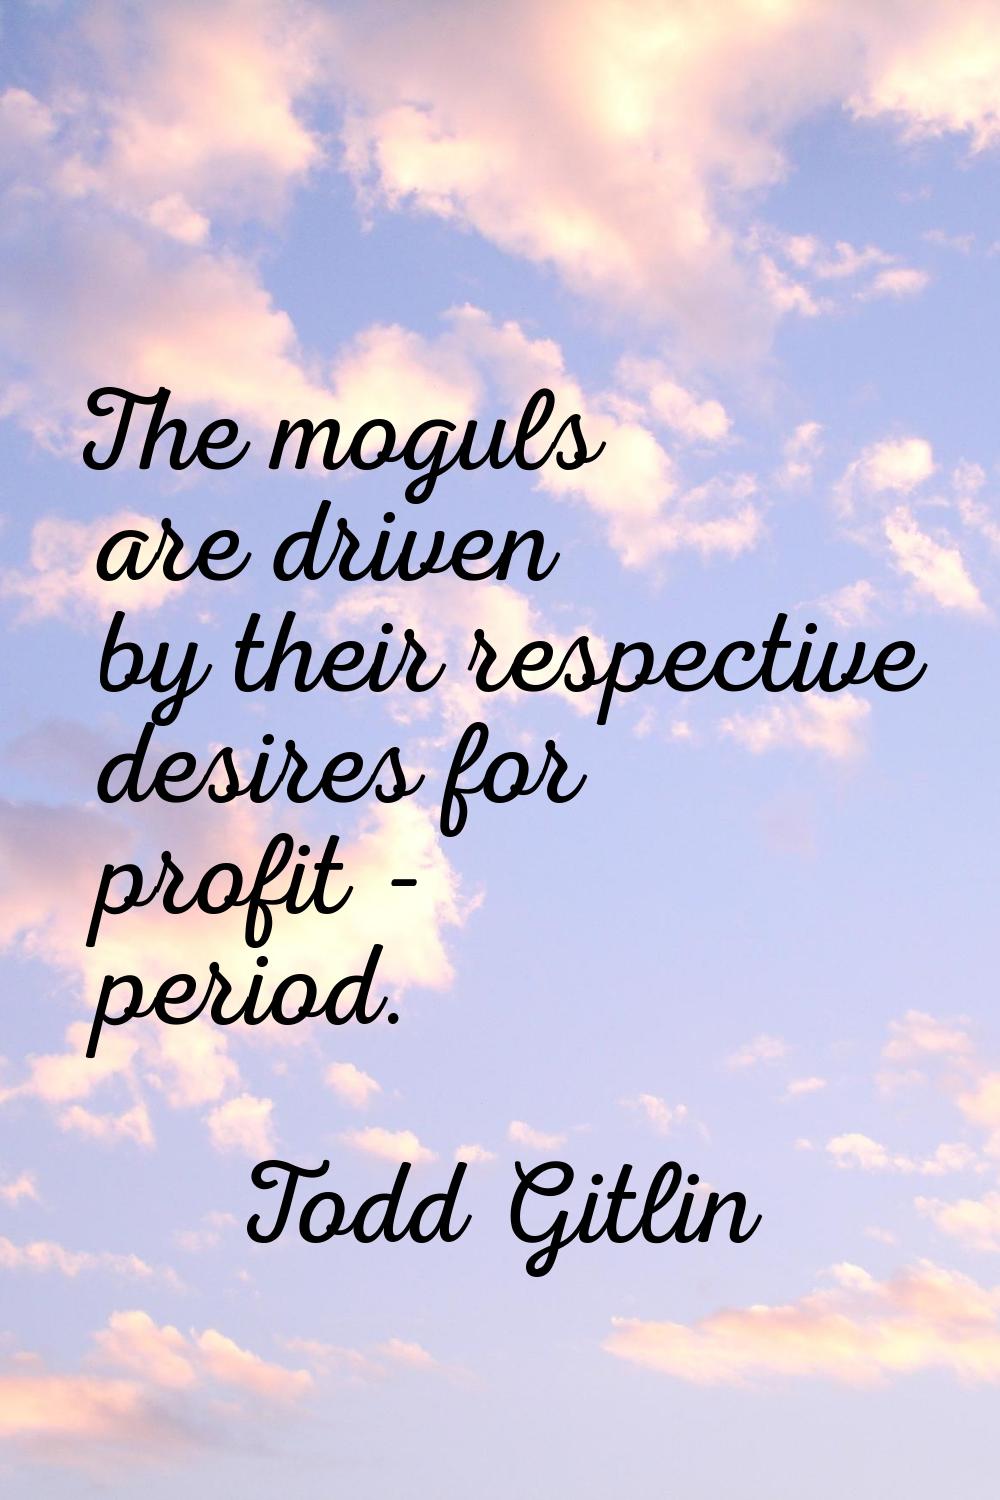 The moguls are driven by their respective desires for profit - period.